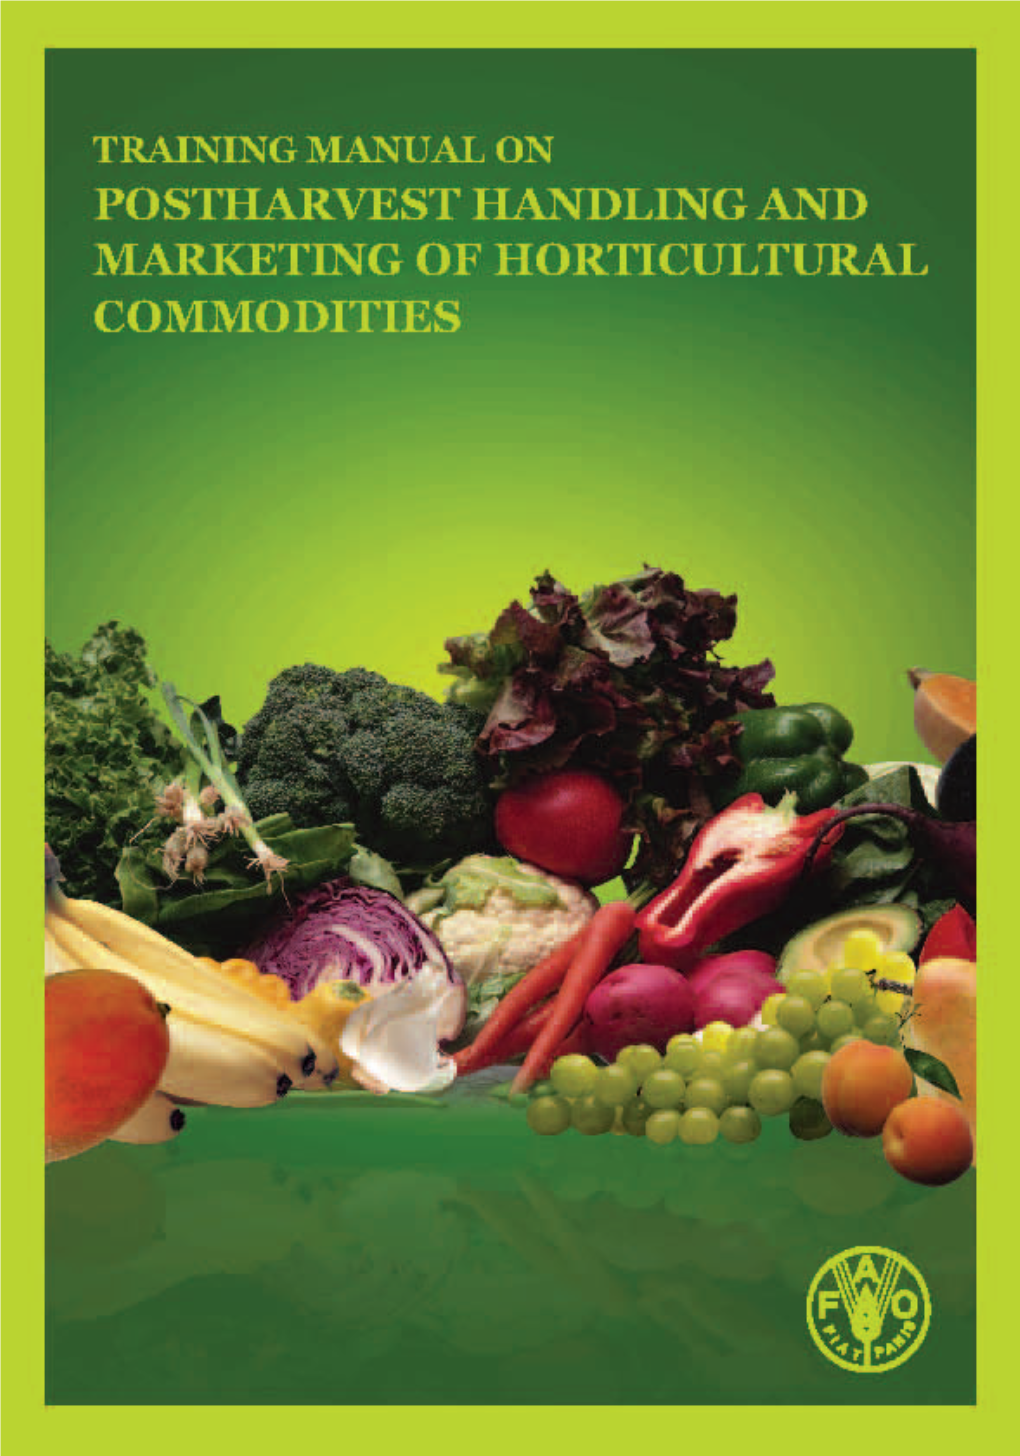 Training Manual on Postharvest Handling and Marketing of Horticultural Commodities